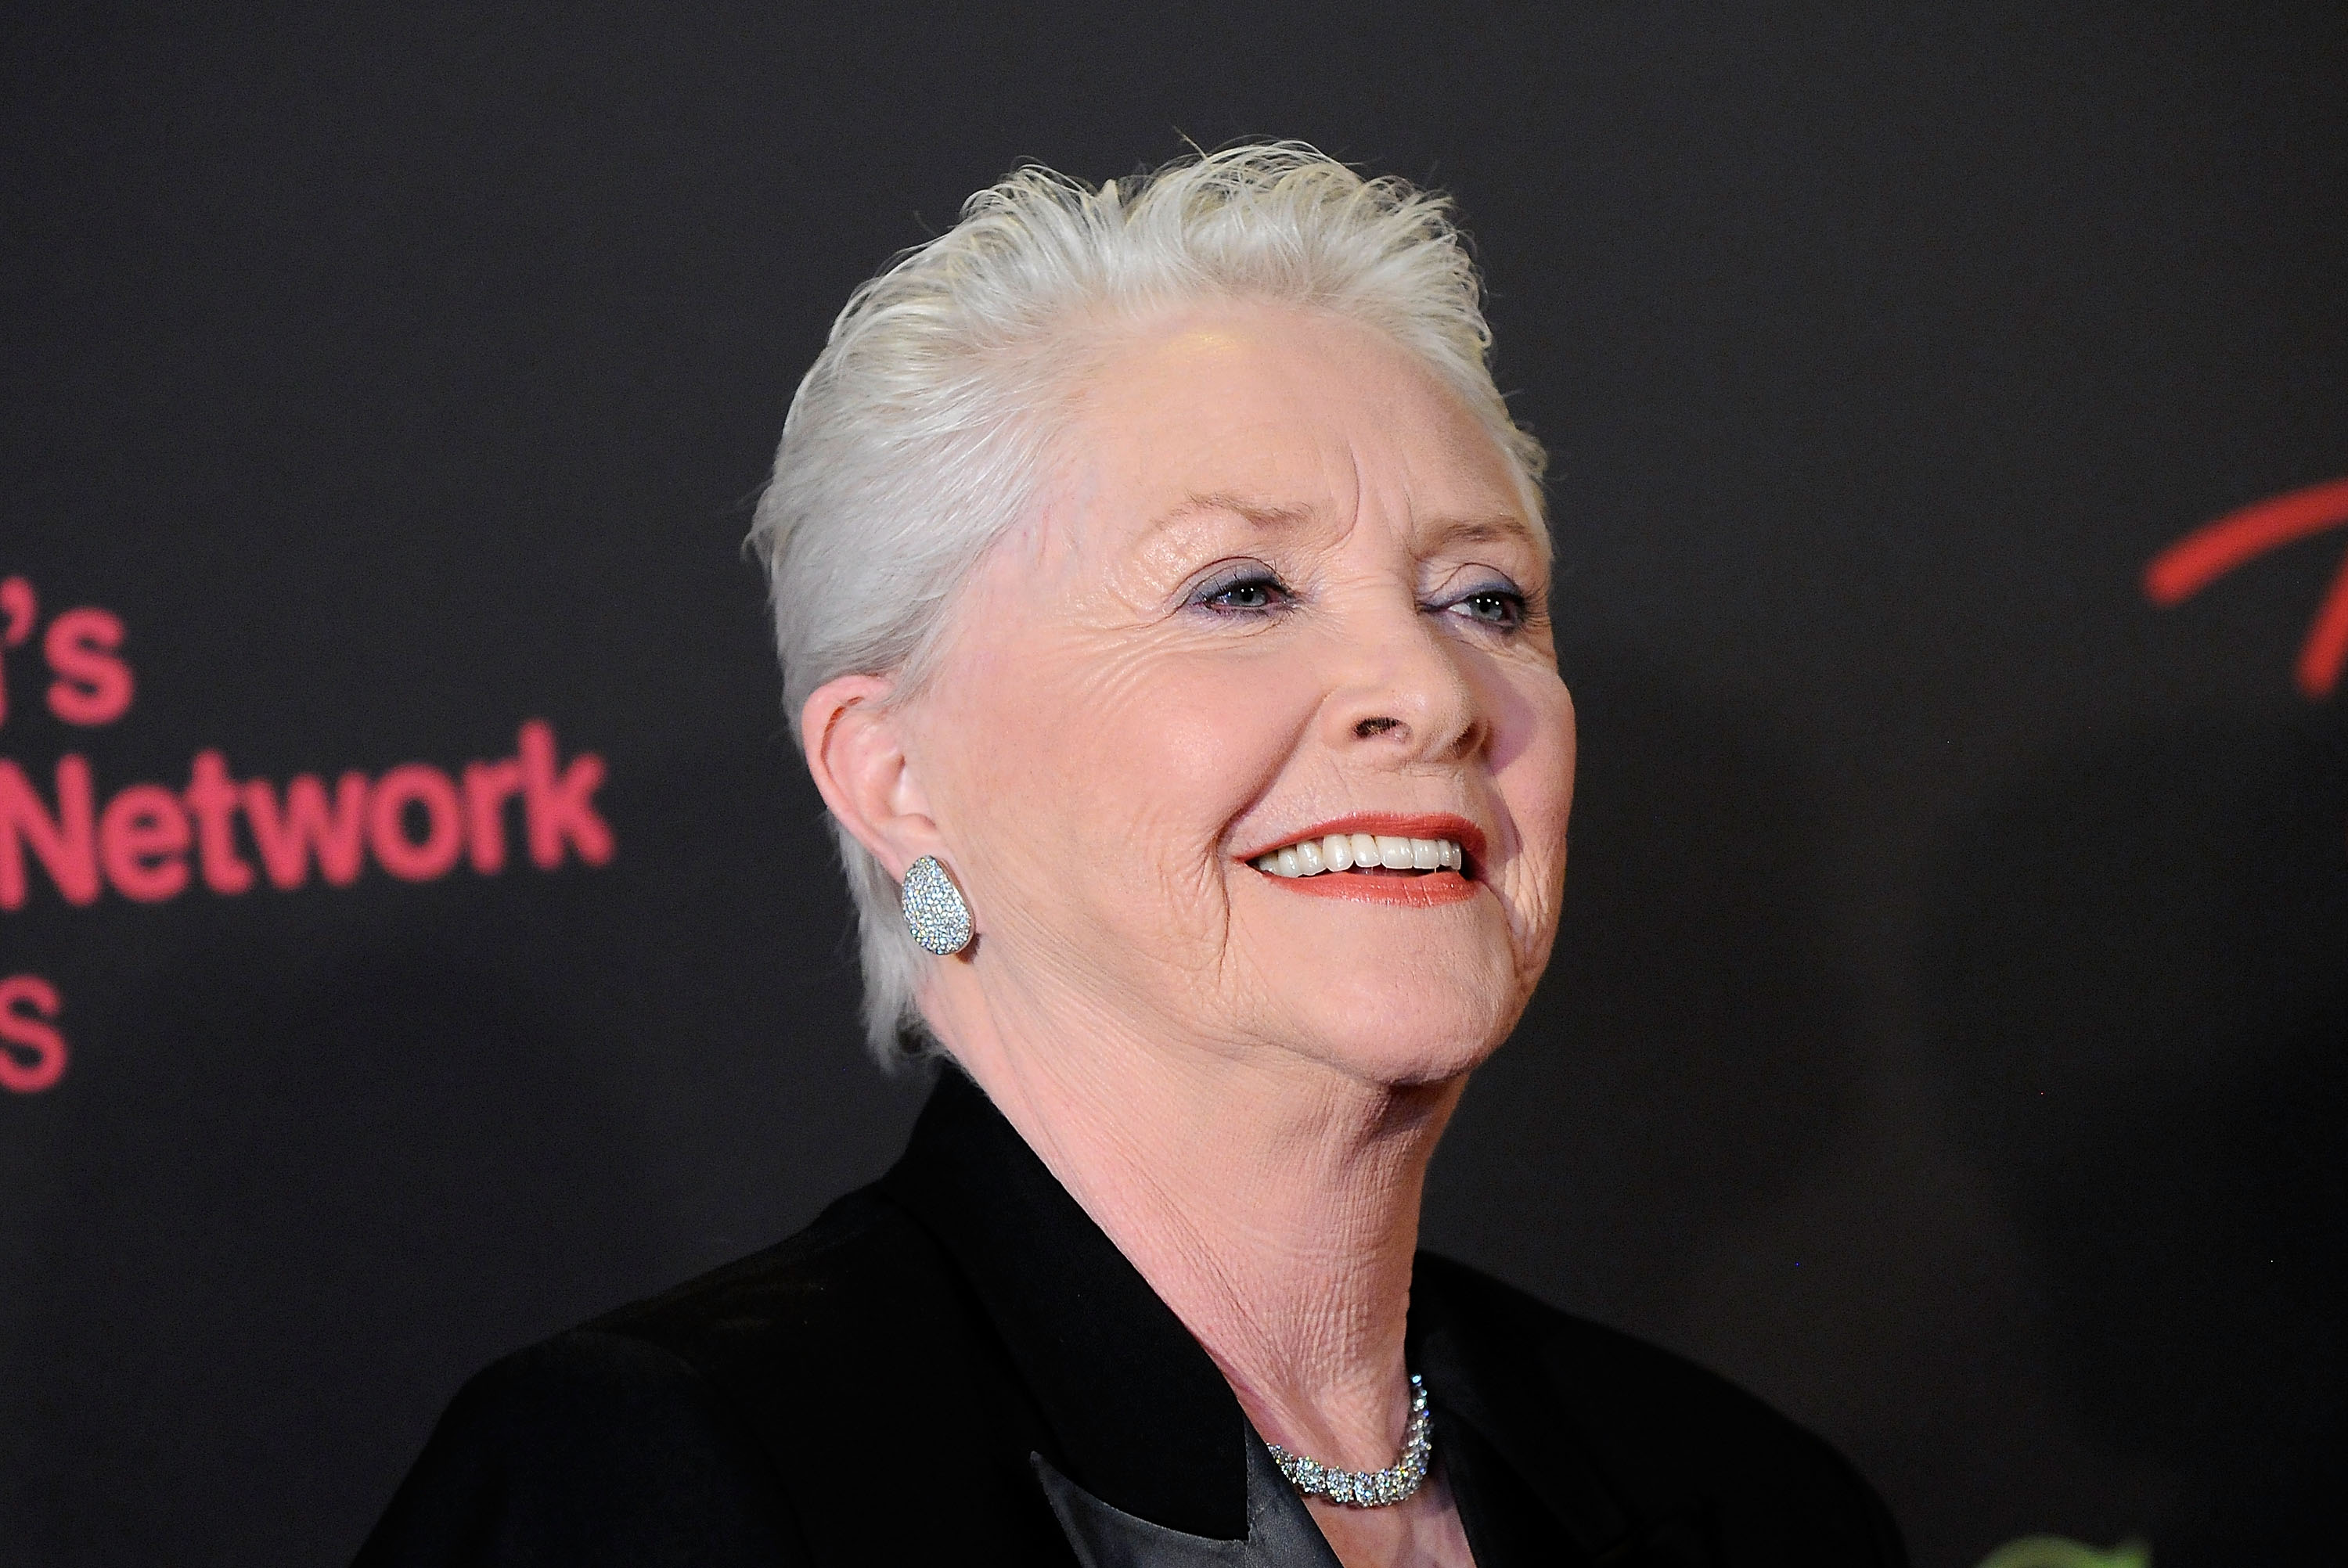 'The Bold and the Beautiful' star Susan Flannery wears a black pantsuit at the 2011 Daytime Emmy Awards.